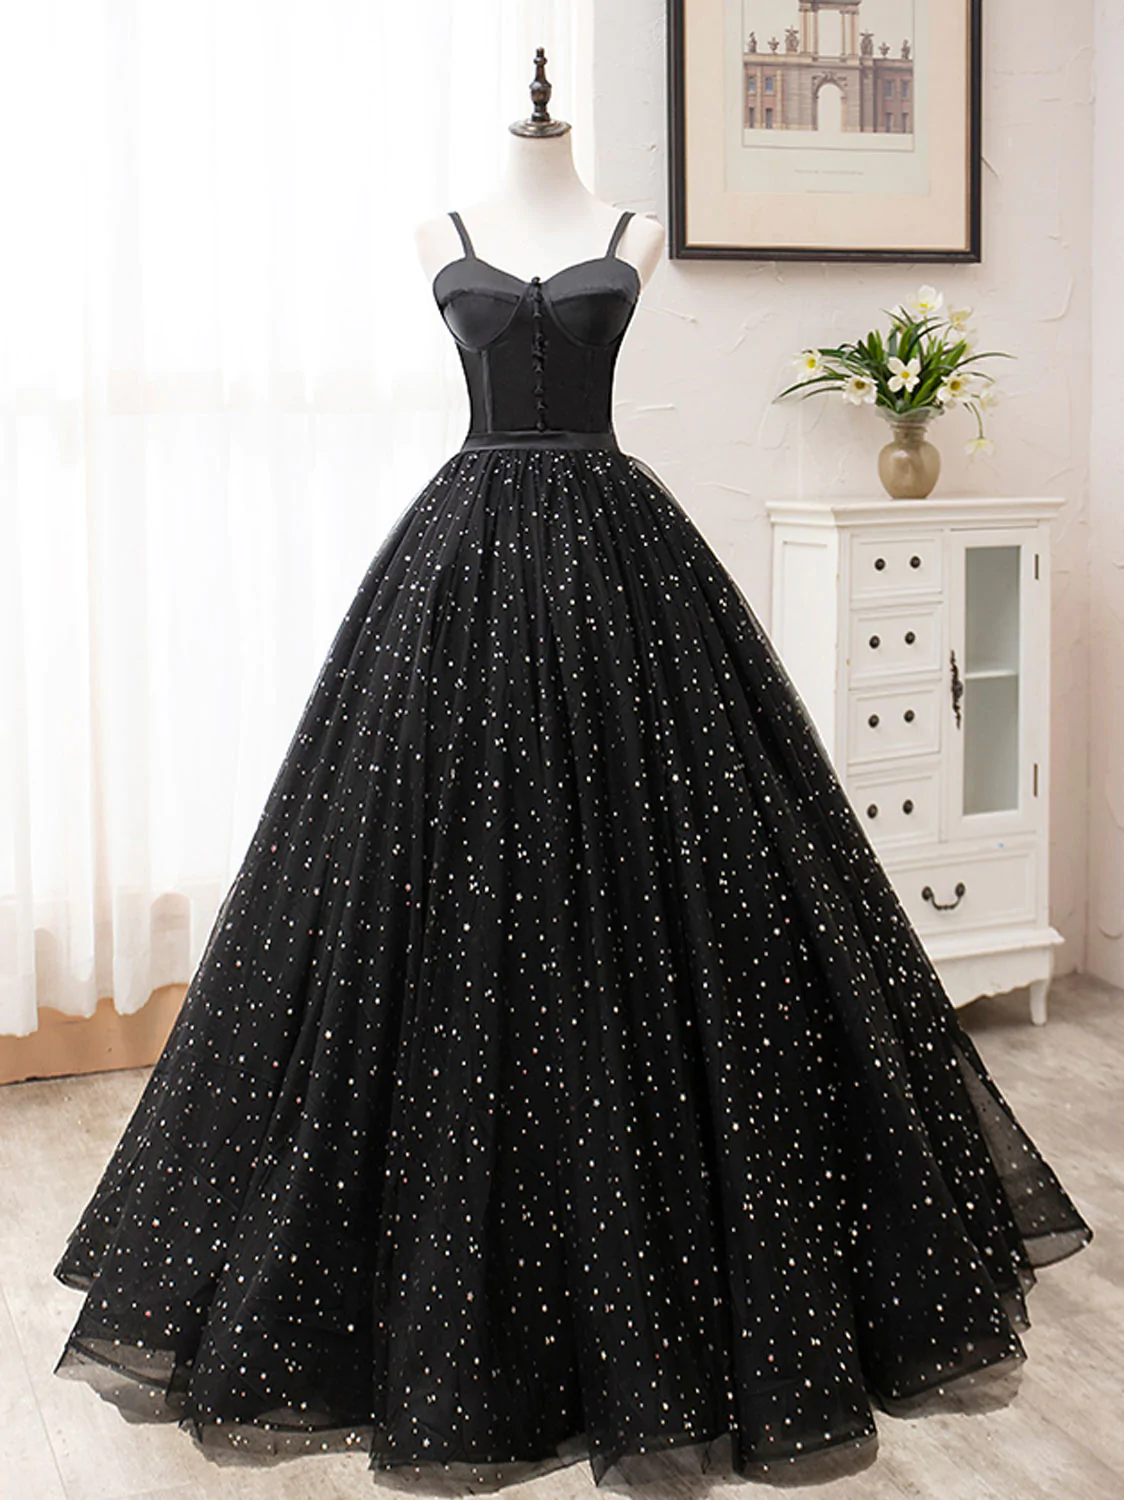 Strapless Strap Ball Gown Black Prom Dress Evening..